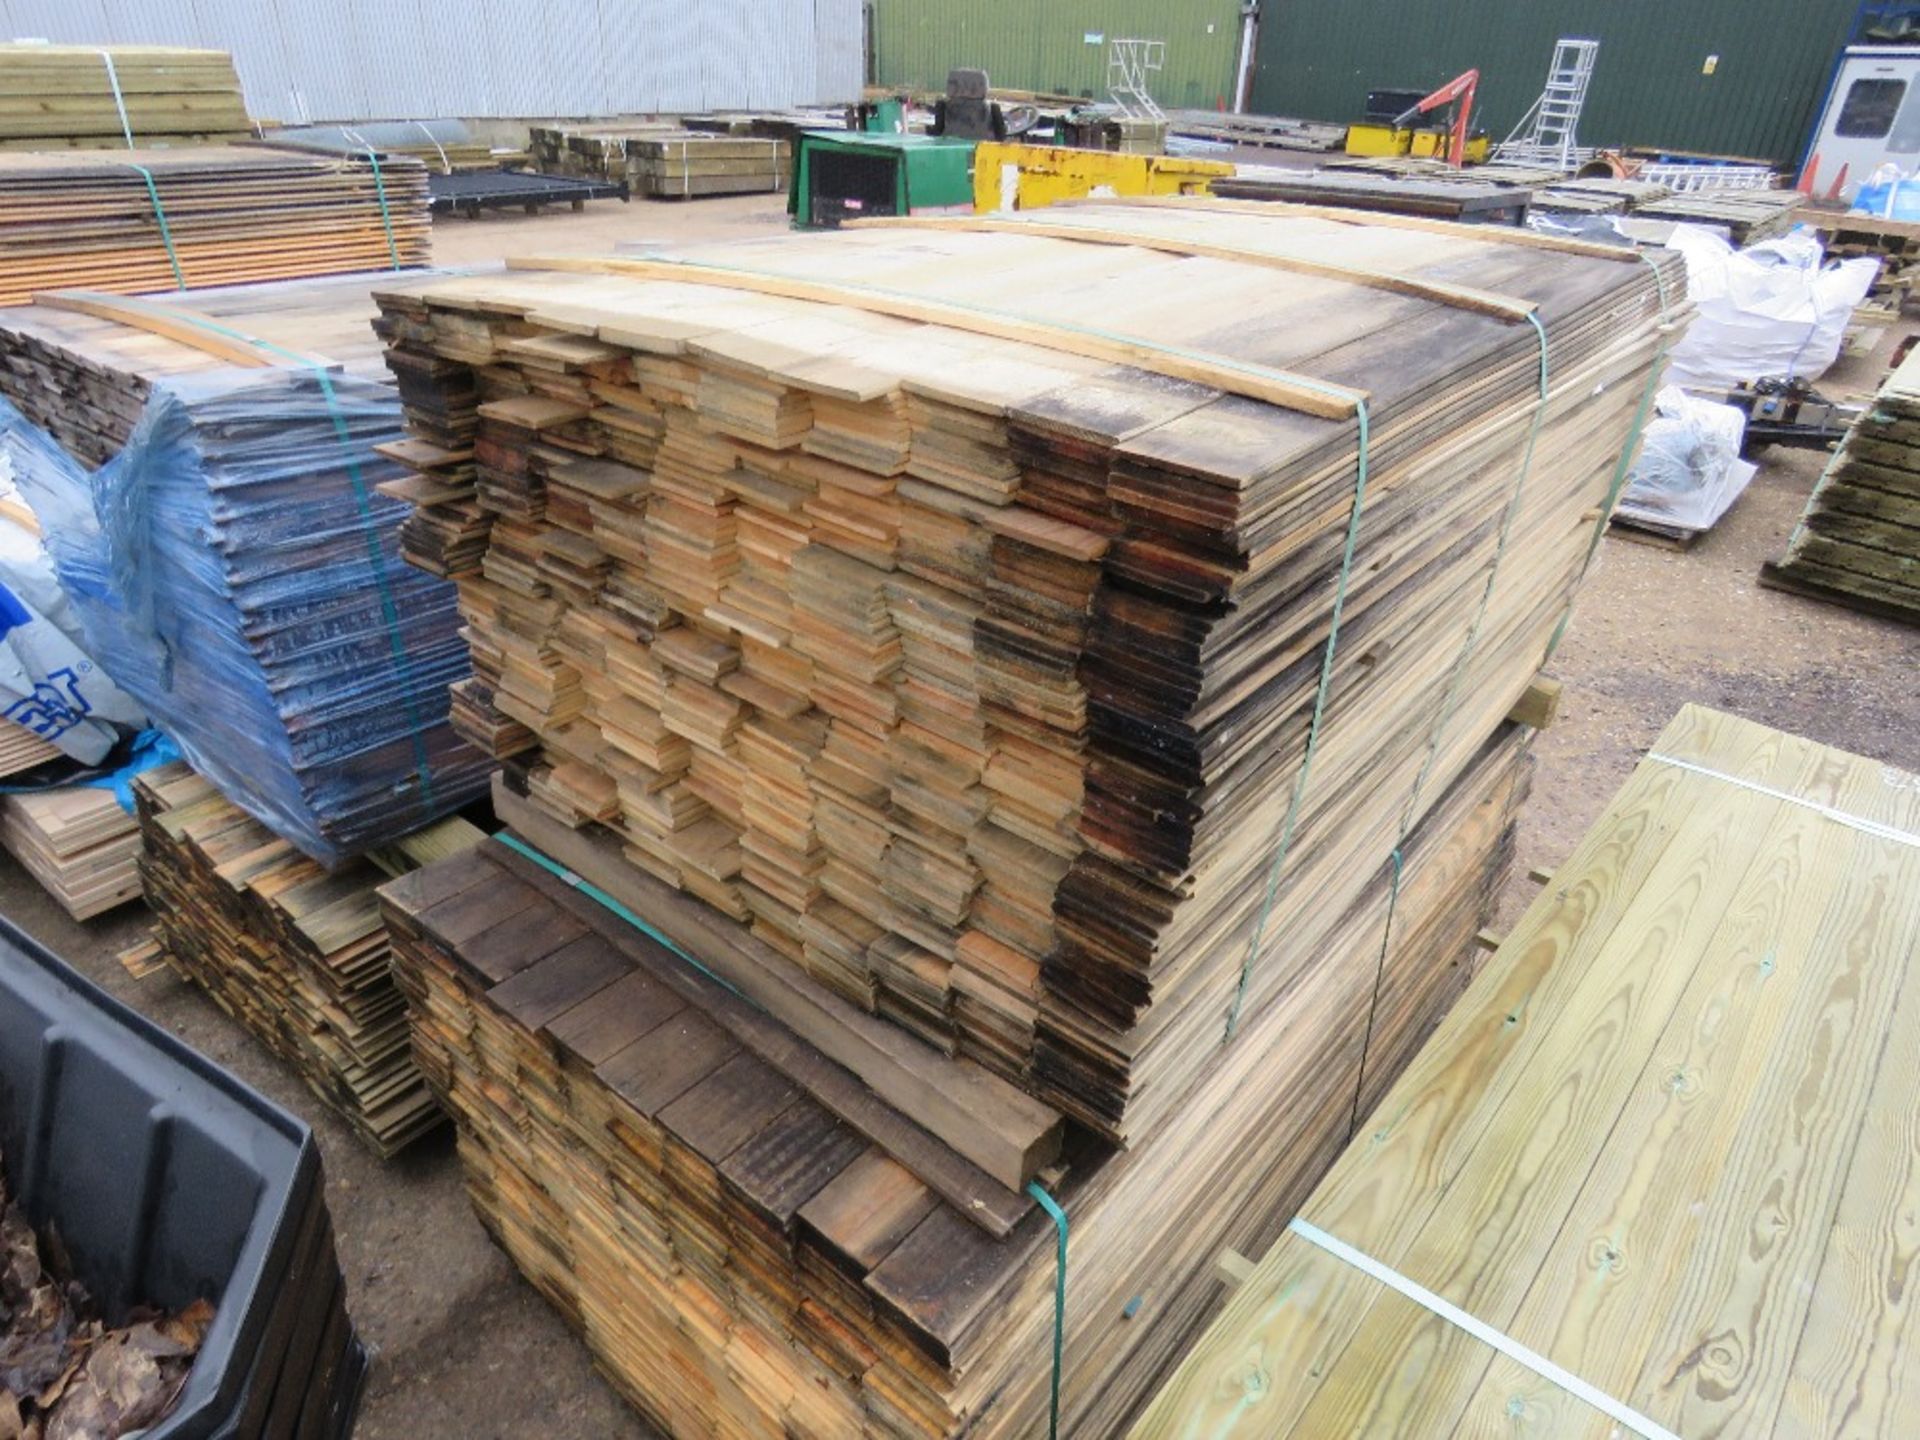 2 X PACKS OF FLAT UNTREATED TIMBER CLADDING BOARDS 1.45M & 1.75M X 10CM WIDE APPROX. - Image 4 of 4